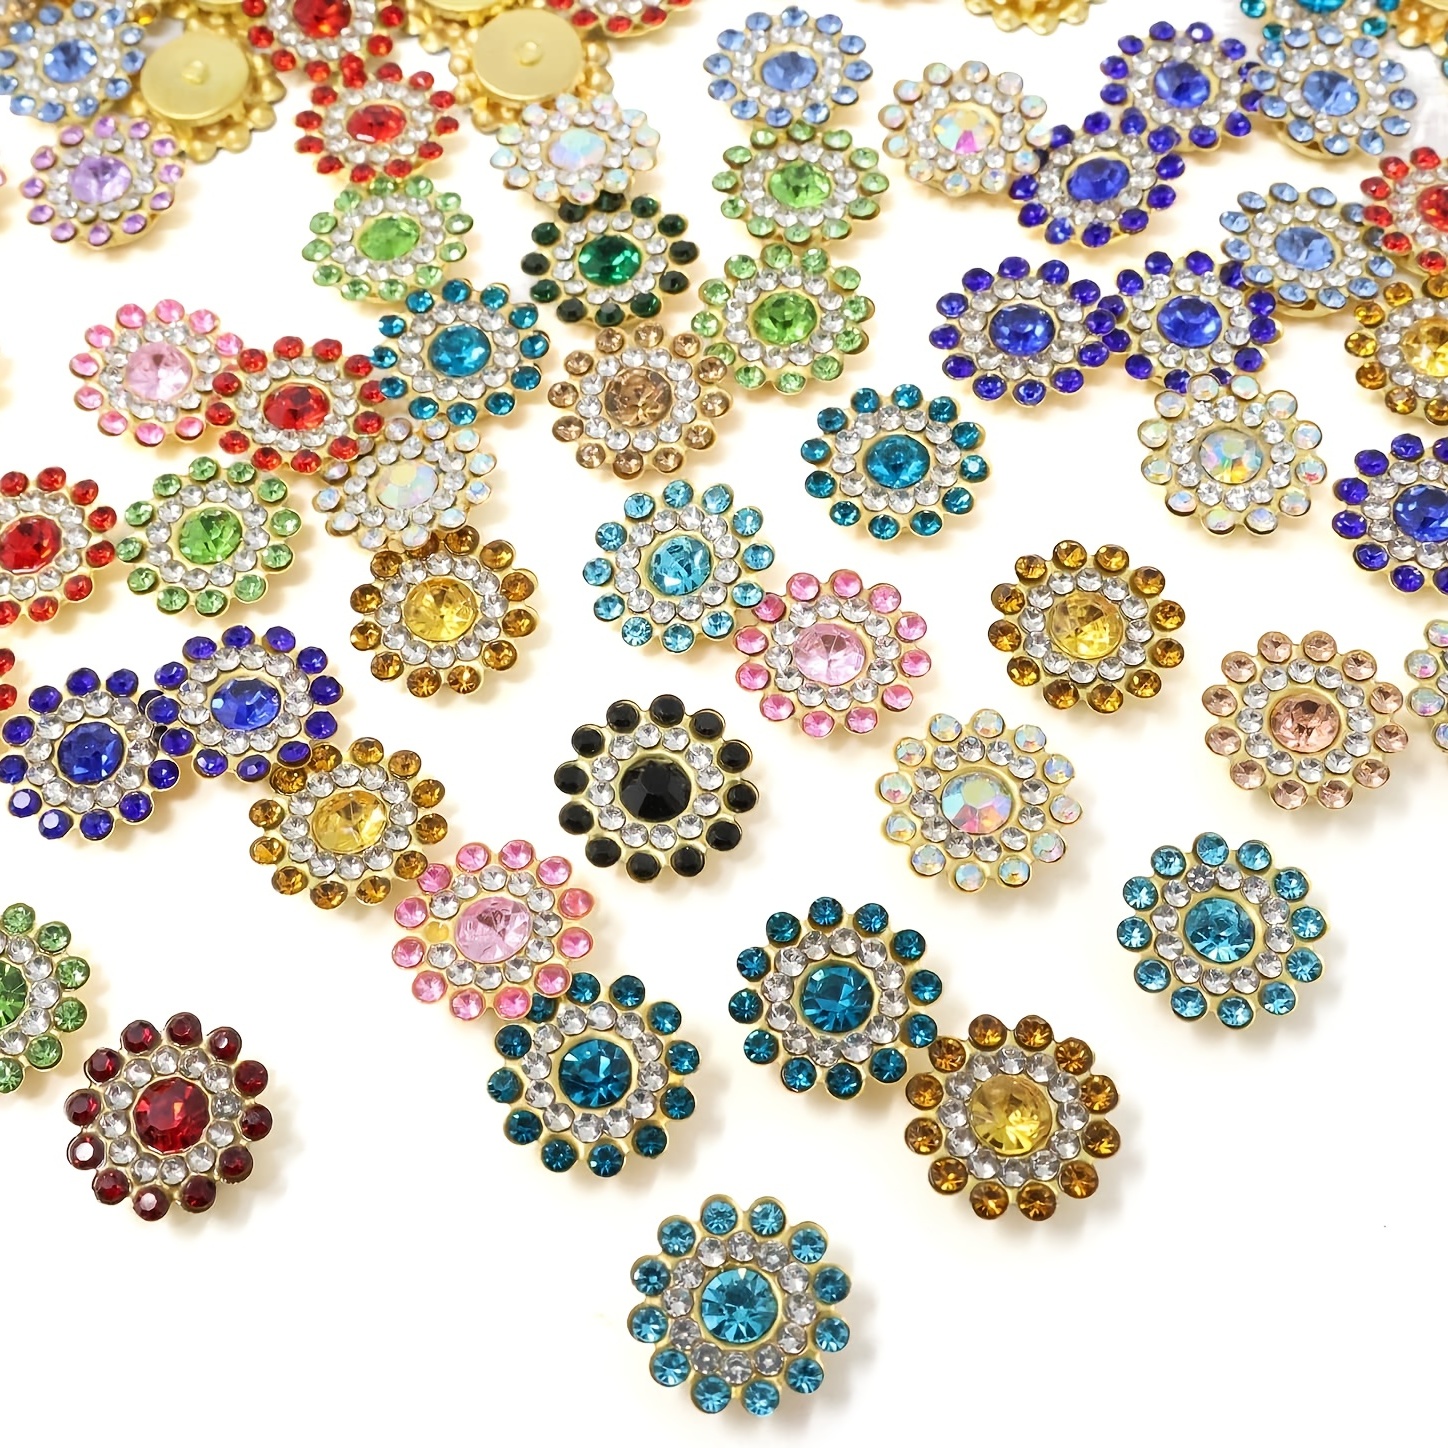 Rhinestone Buttons Faux Pearl Buttons, Flat Back Flower Rhinestone Buttons  Pearl Sew on Clothing Buttons for DIY Crafts Jewelry Phone 50 Pieces